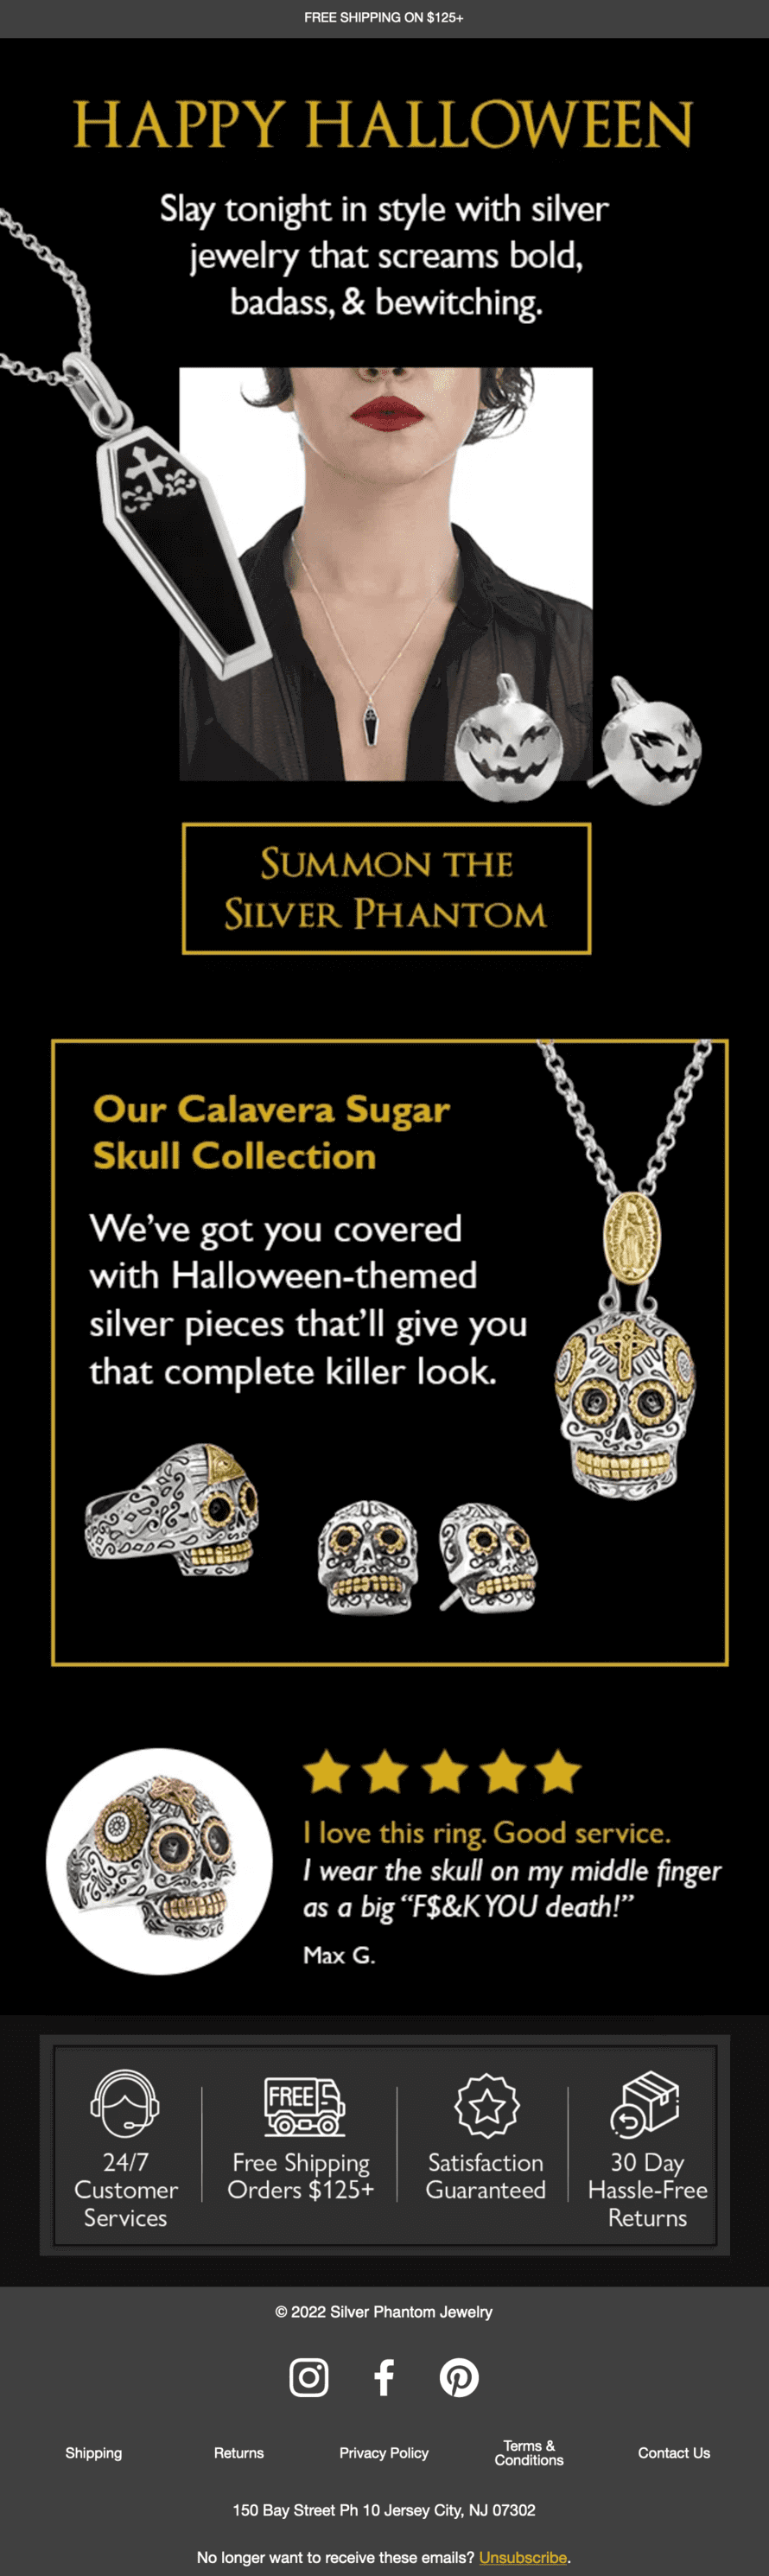 A Halloween email from a jewelry store showcasing several Halloween pieces, a themed collection, and a customer review